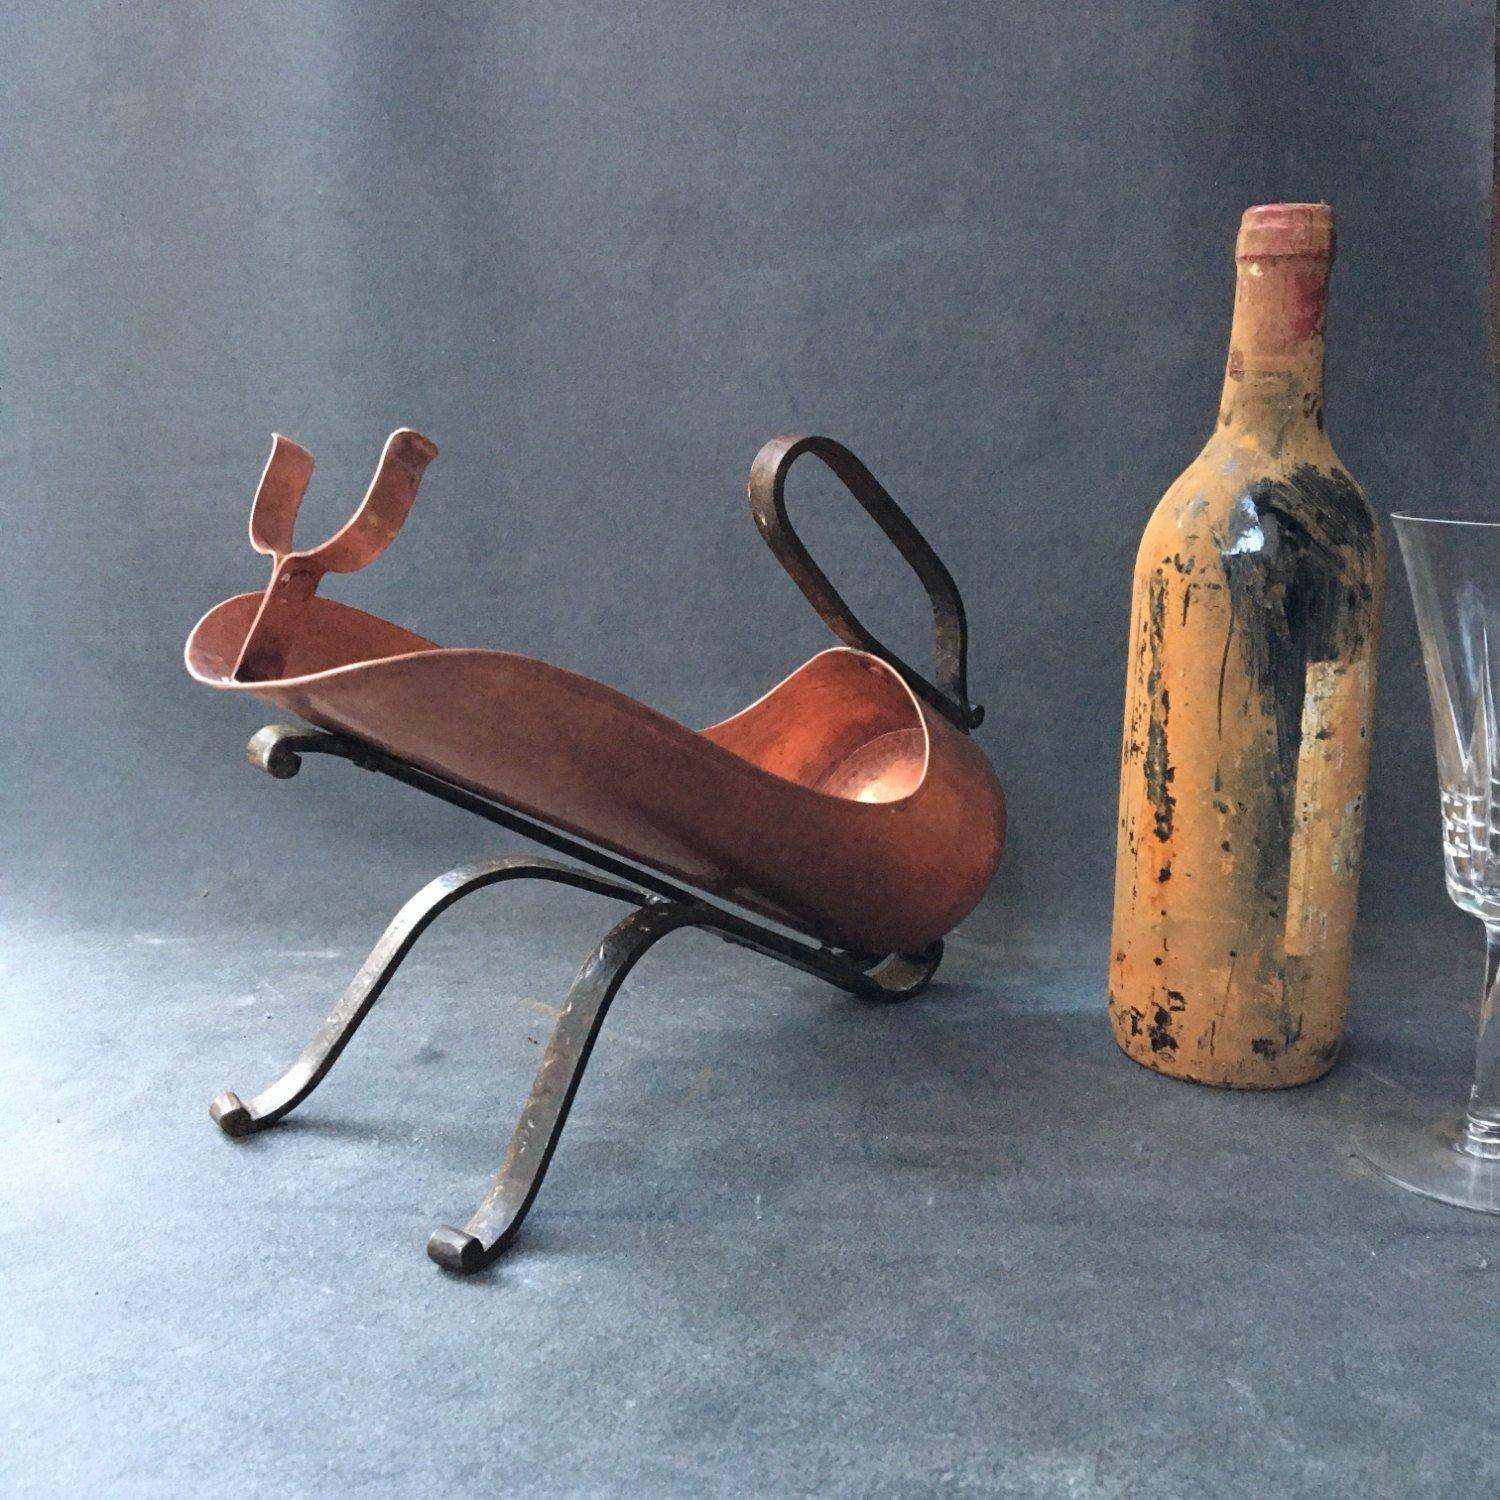 Superb bottle holder table to create a beautiful table for the holidays! And to decant and serve the wine so that it is better.

And beautiful collector's item thanks to its zoomorphic decorative aspect.

In copper and hammered metal. Handmade